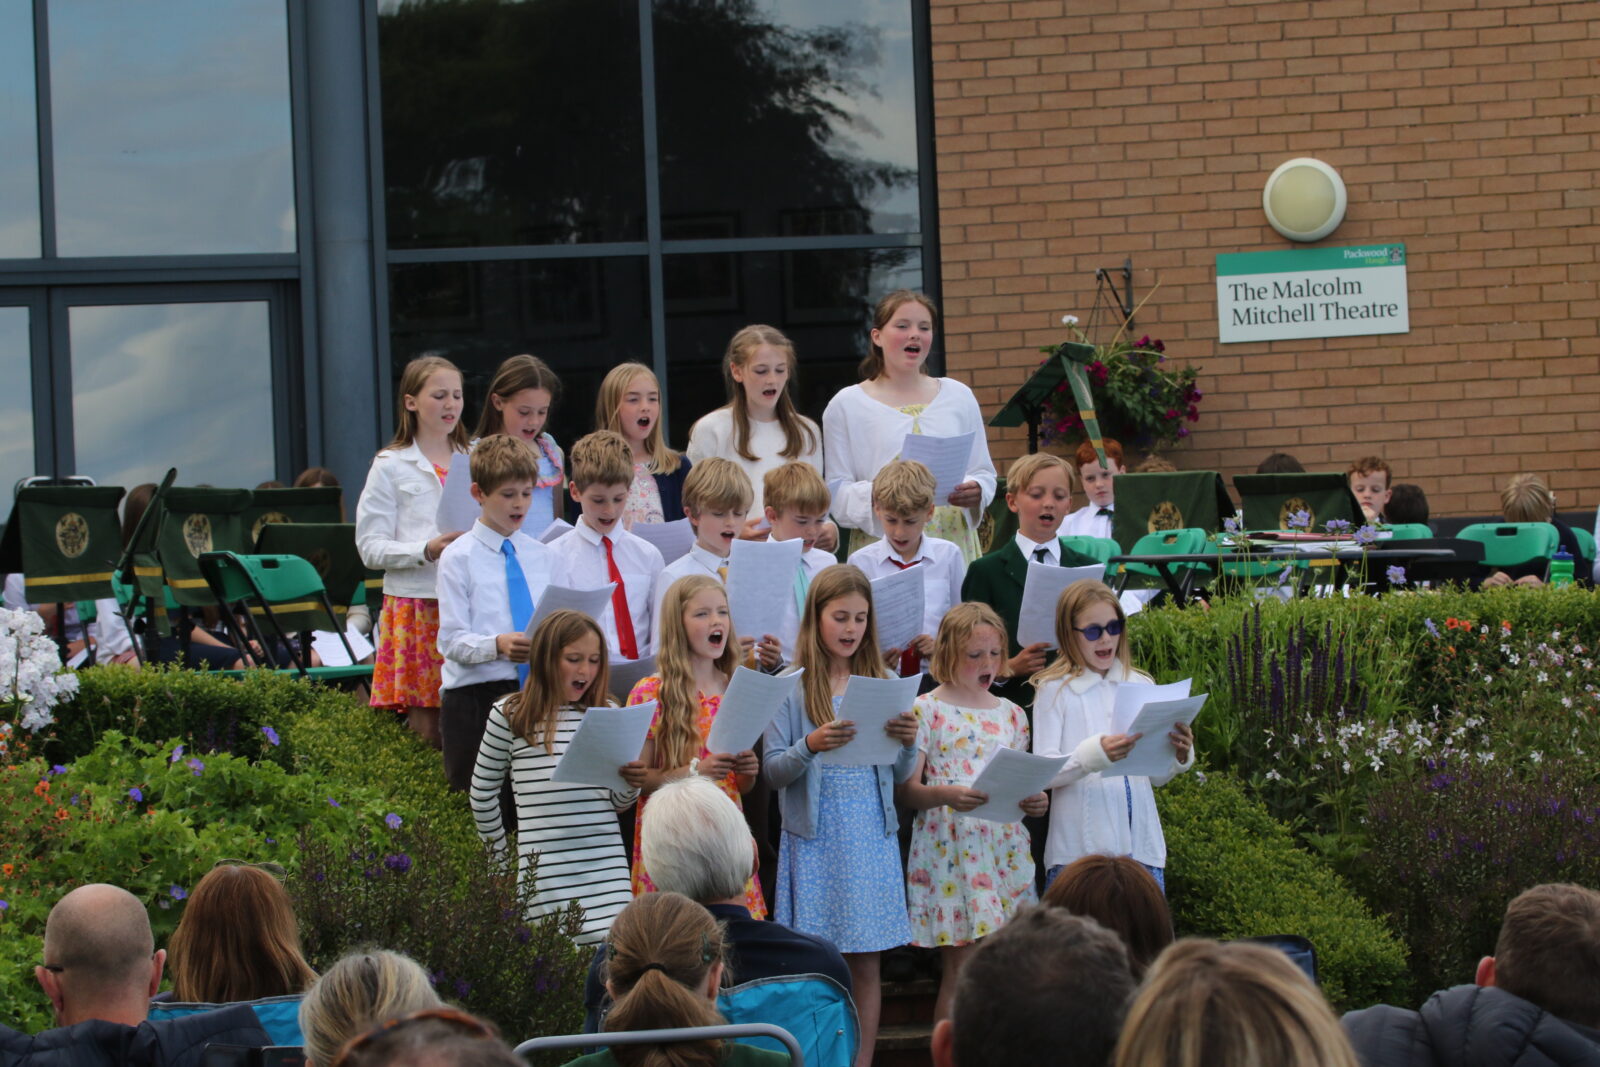 A choir of boys and girls performing school concert outdoors